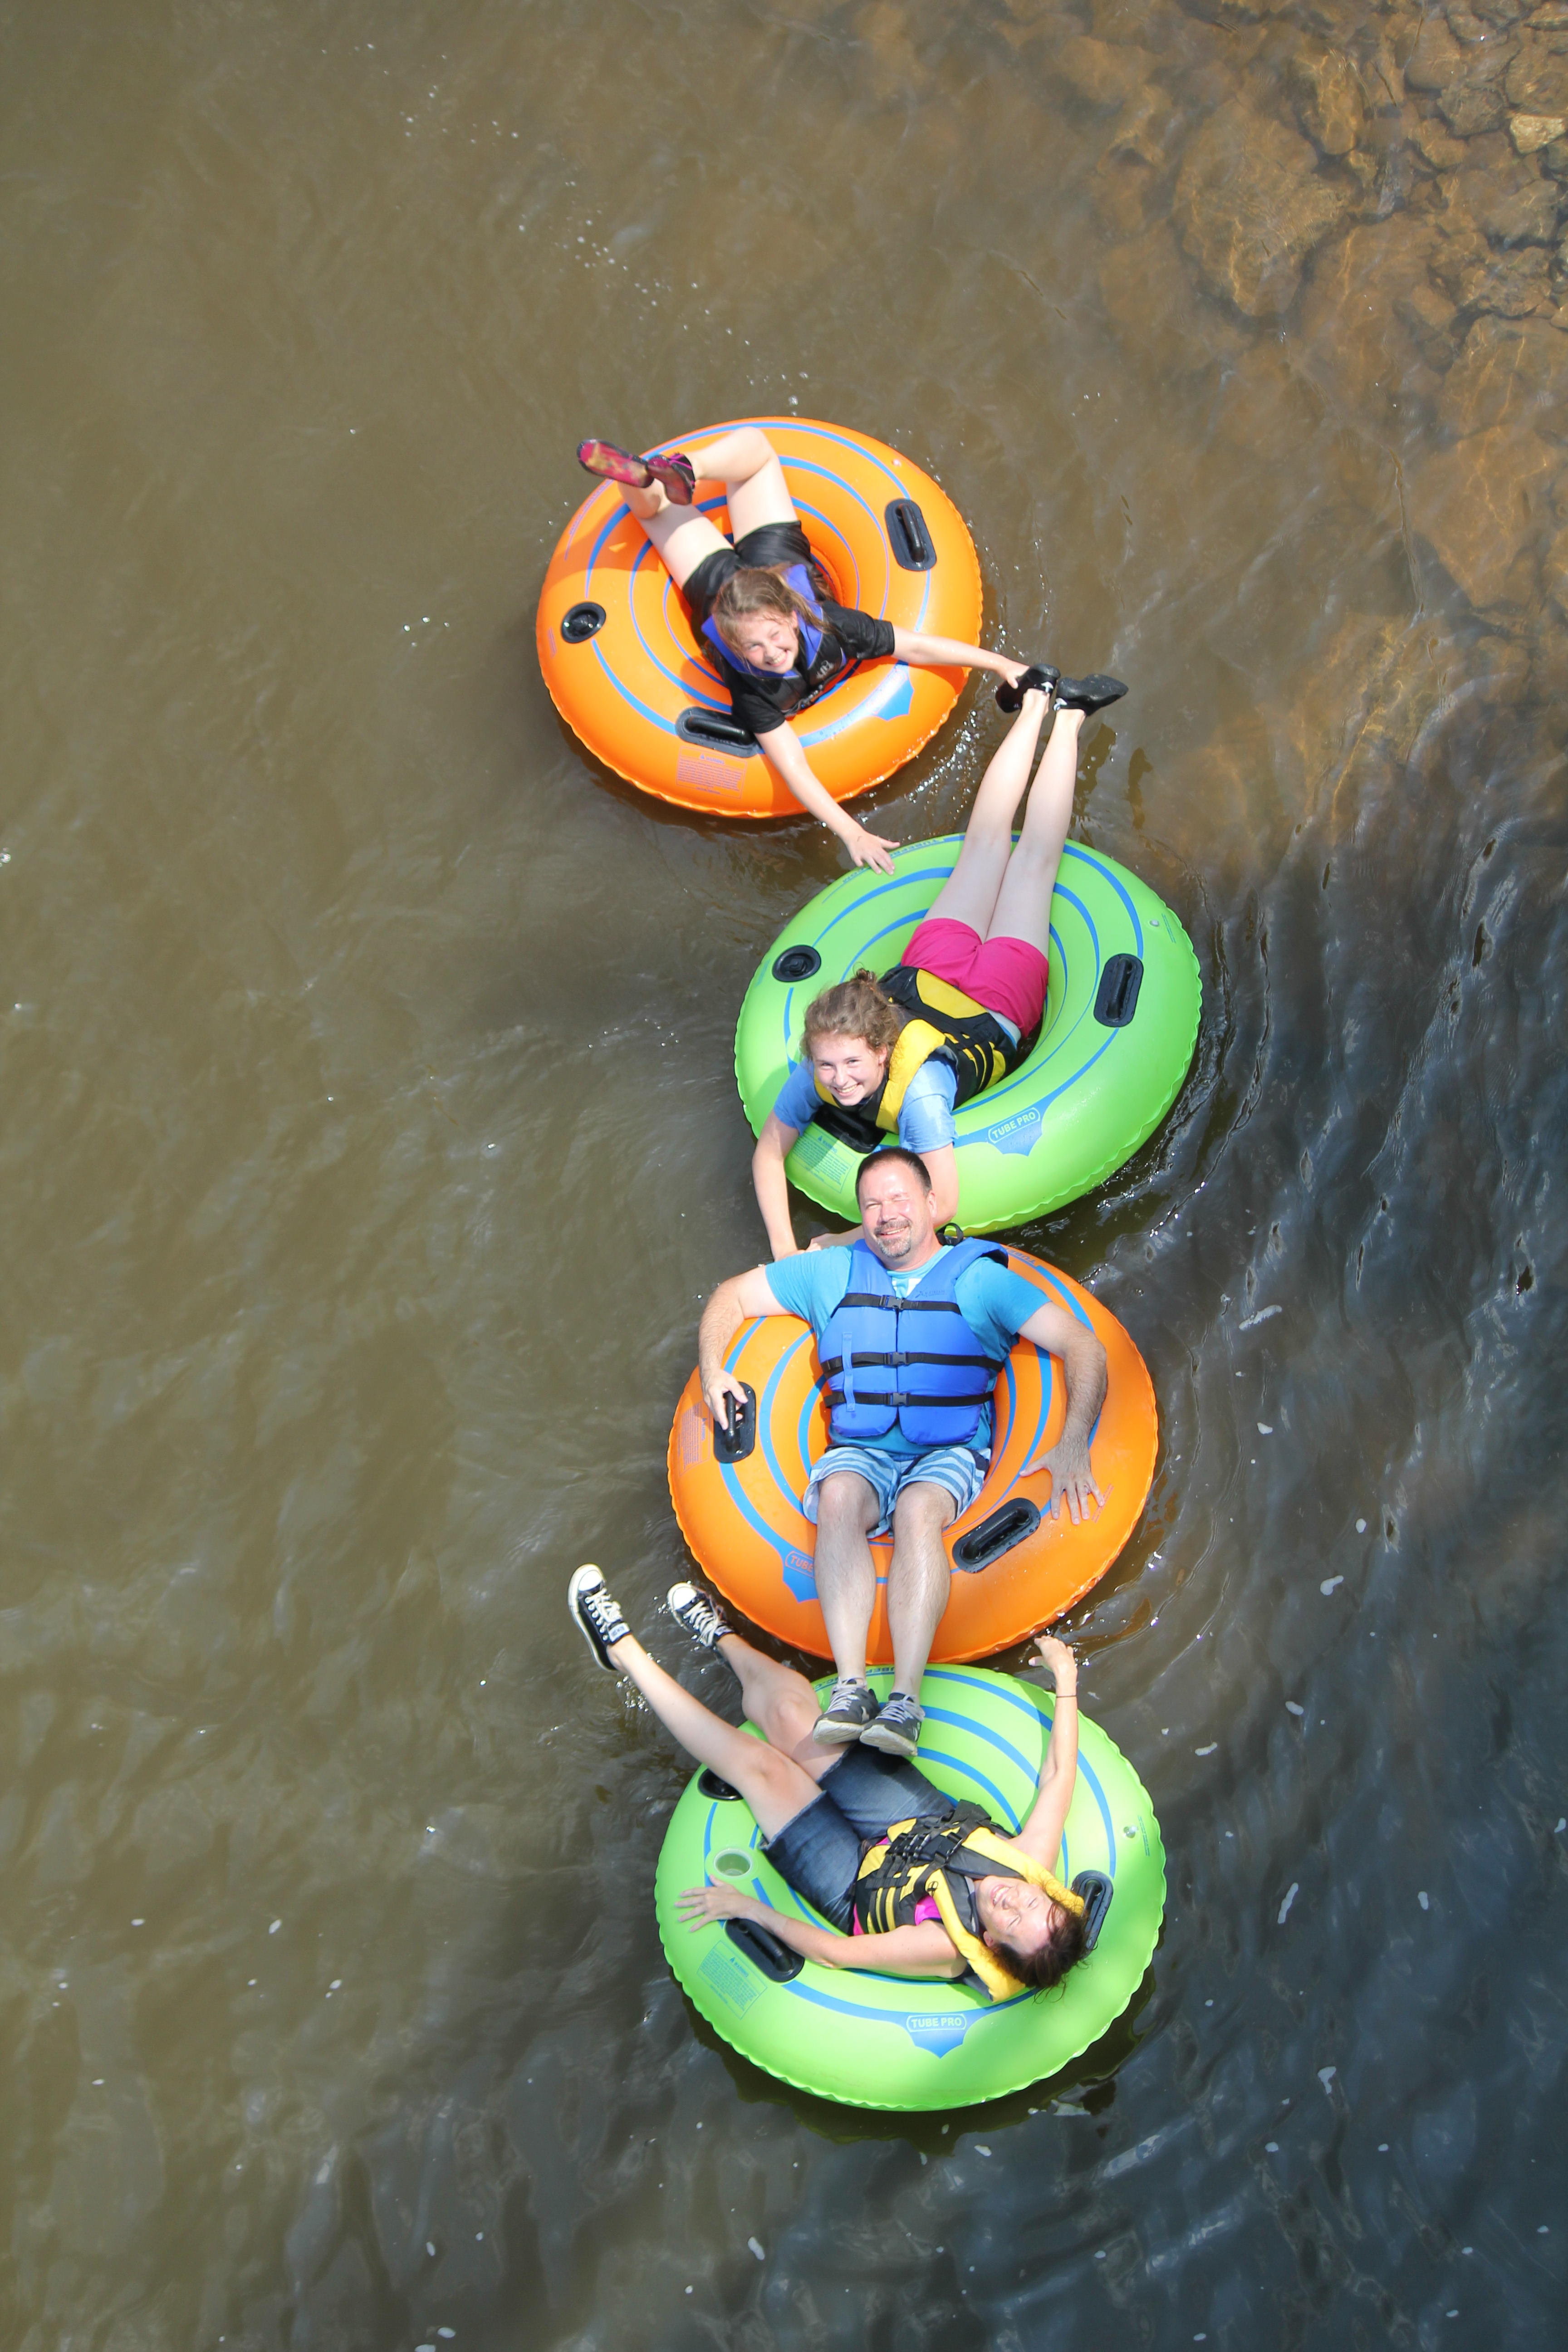 twin-rivers-tubing-1-centre-square-circle-easton-pa-water-sports